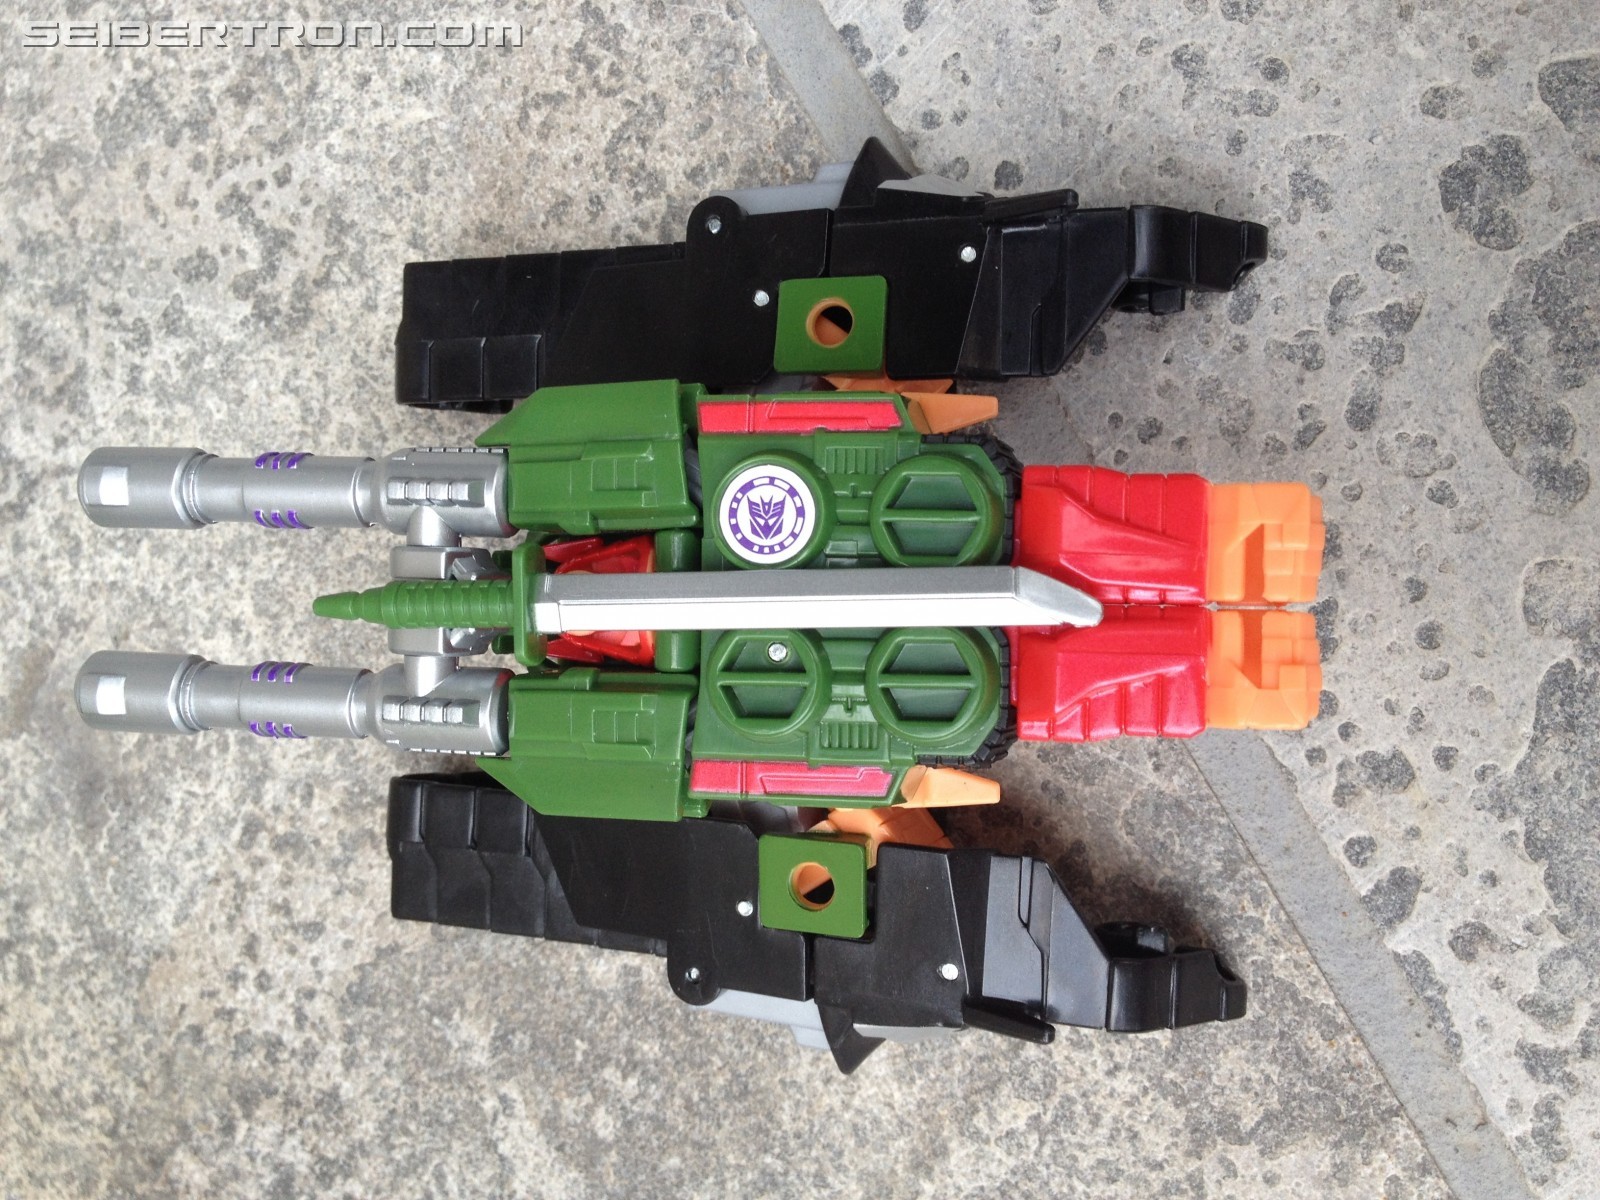 Transformers News: Pictorial Review of Robots in Disguise Warrior Bludgeon